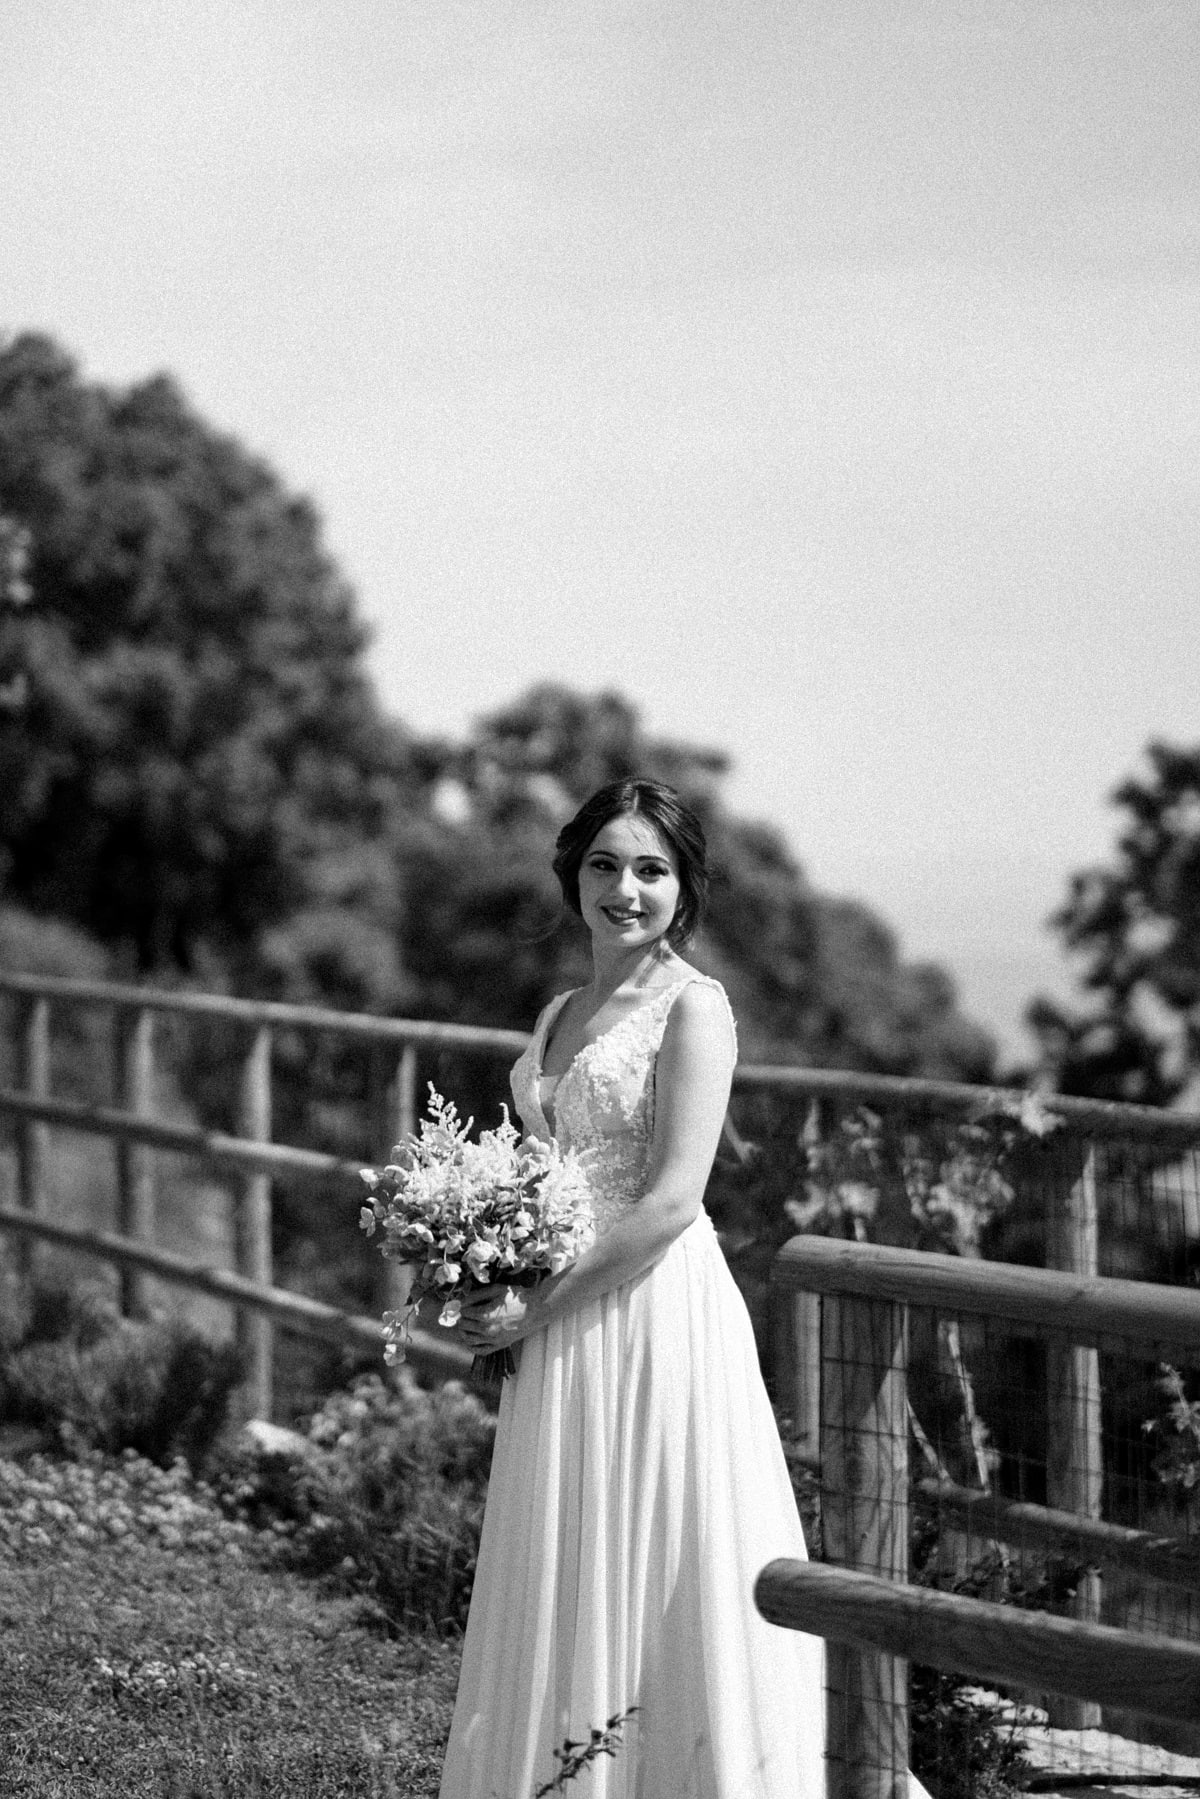 L’aura Bianca Destination Wedding & Event Planner Italy | Valued Member of Weddings Abroad Guide Supplier Directory